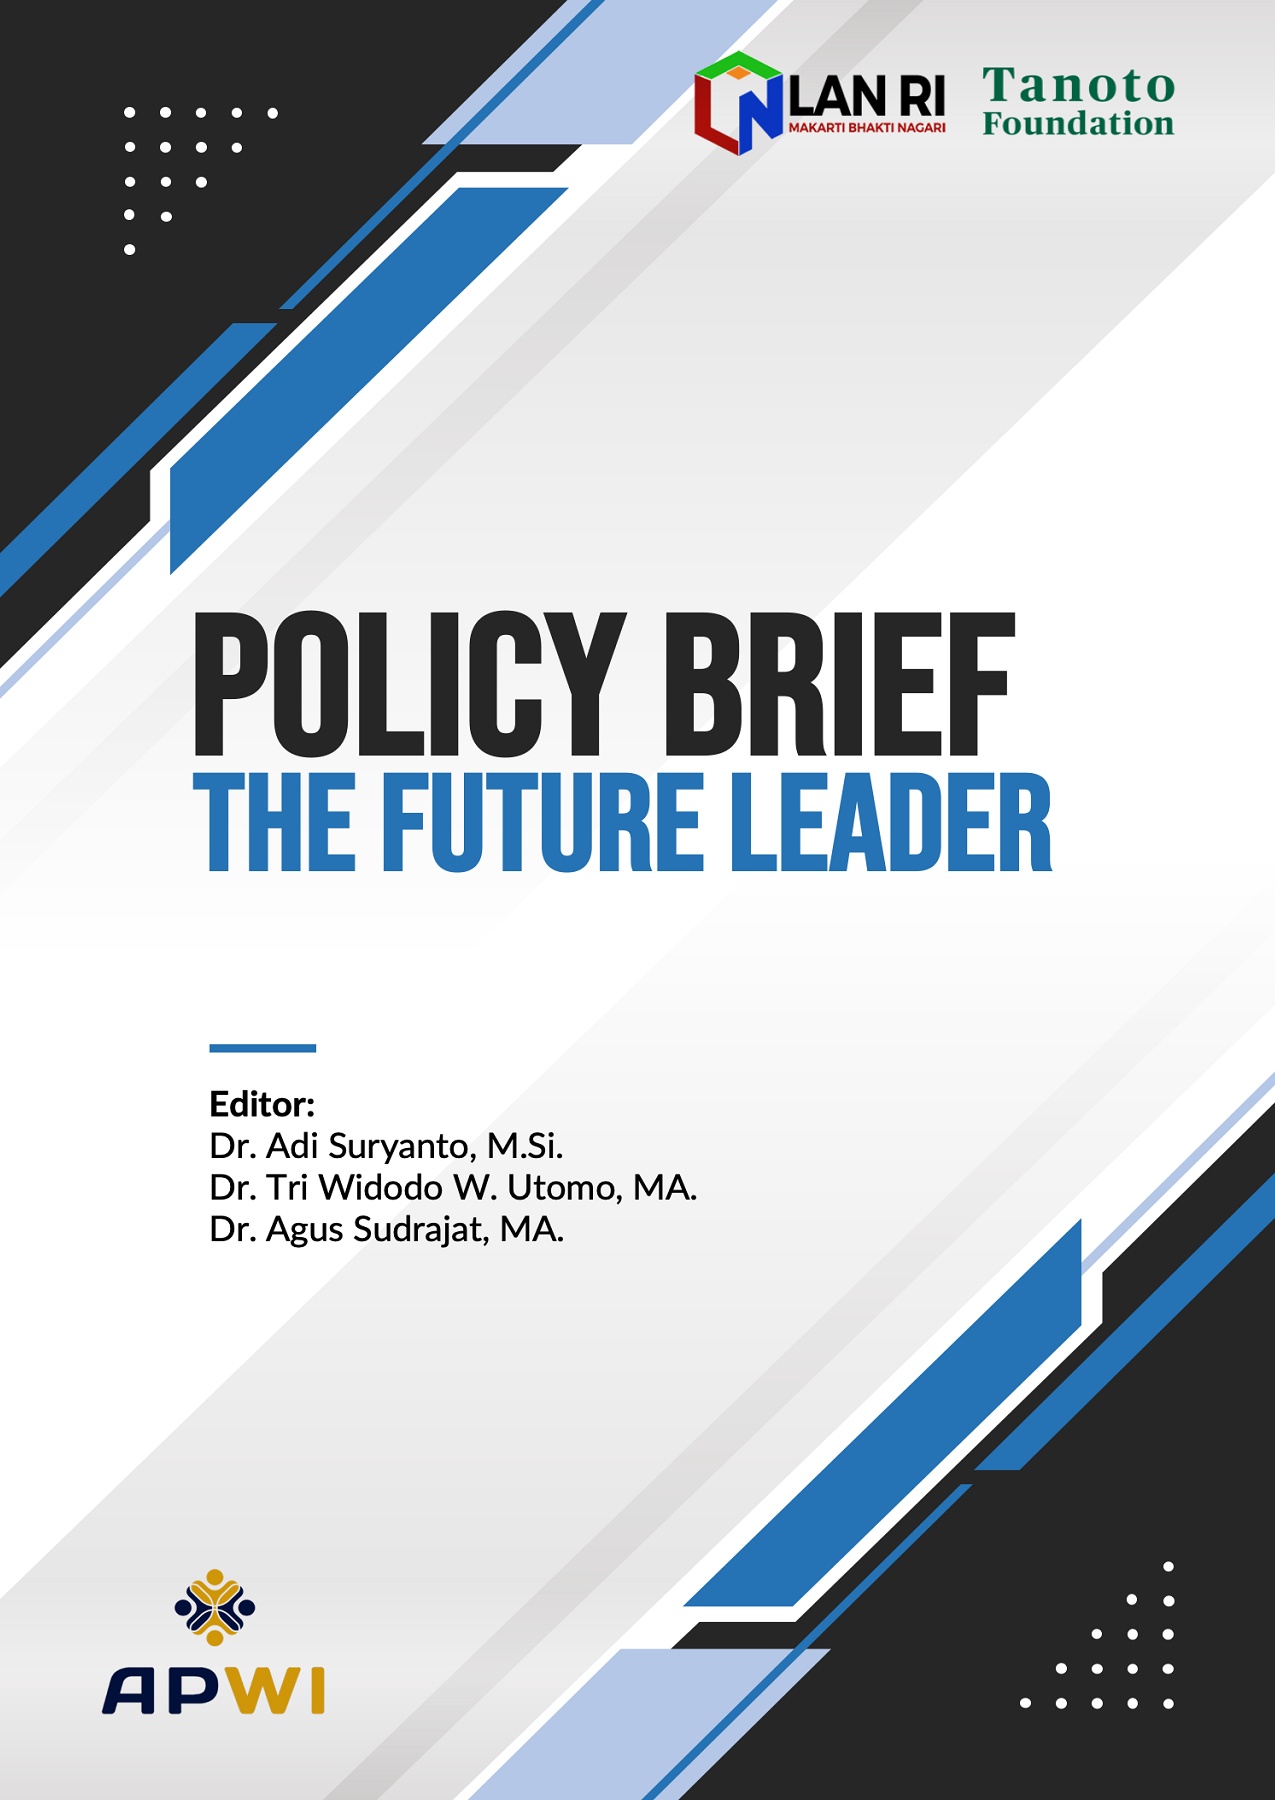 Policy brief the future leaders